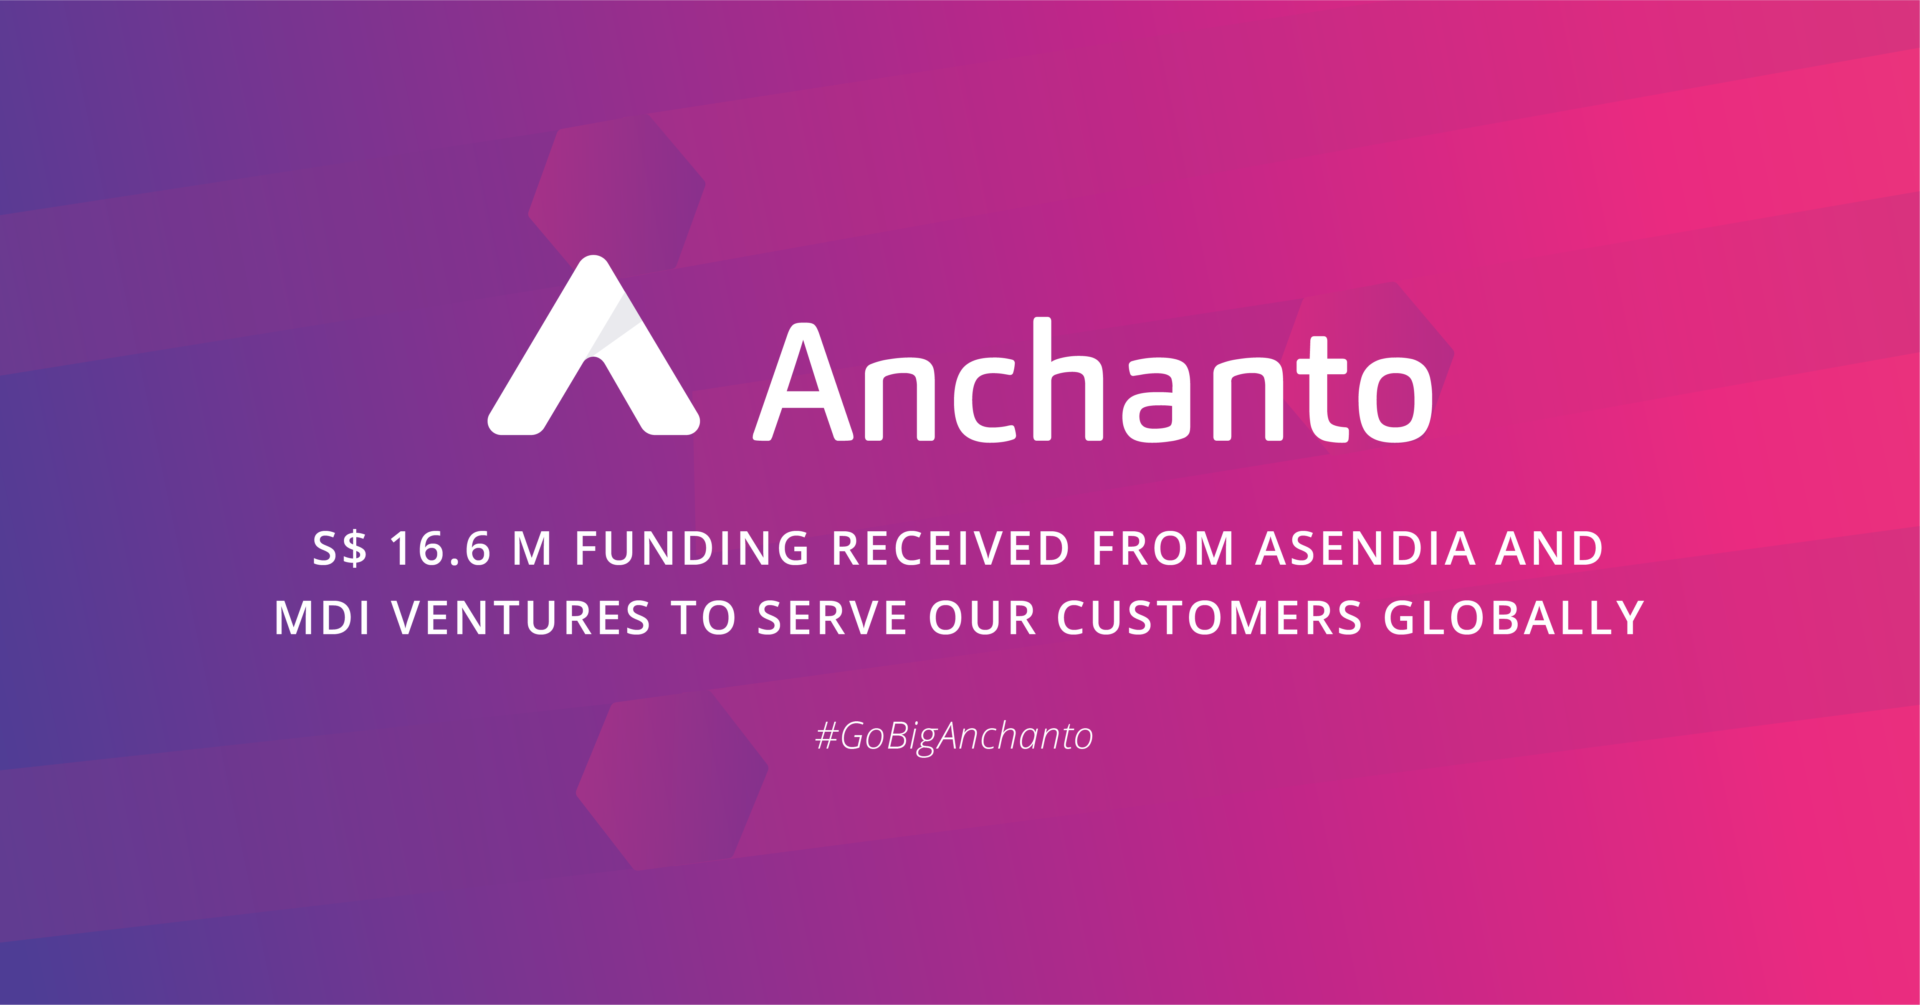 Anchanto achieves profitability and receives S$16.6 million in ongoing Series C-funding round